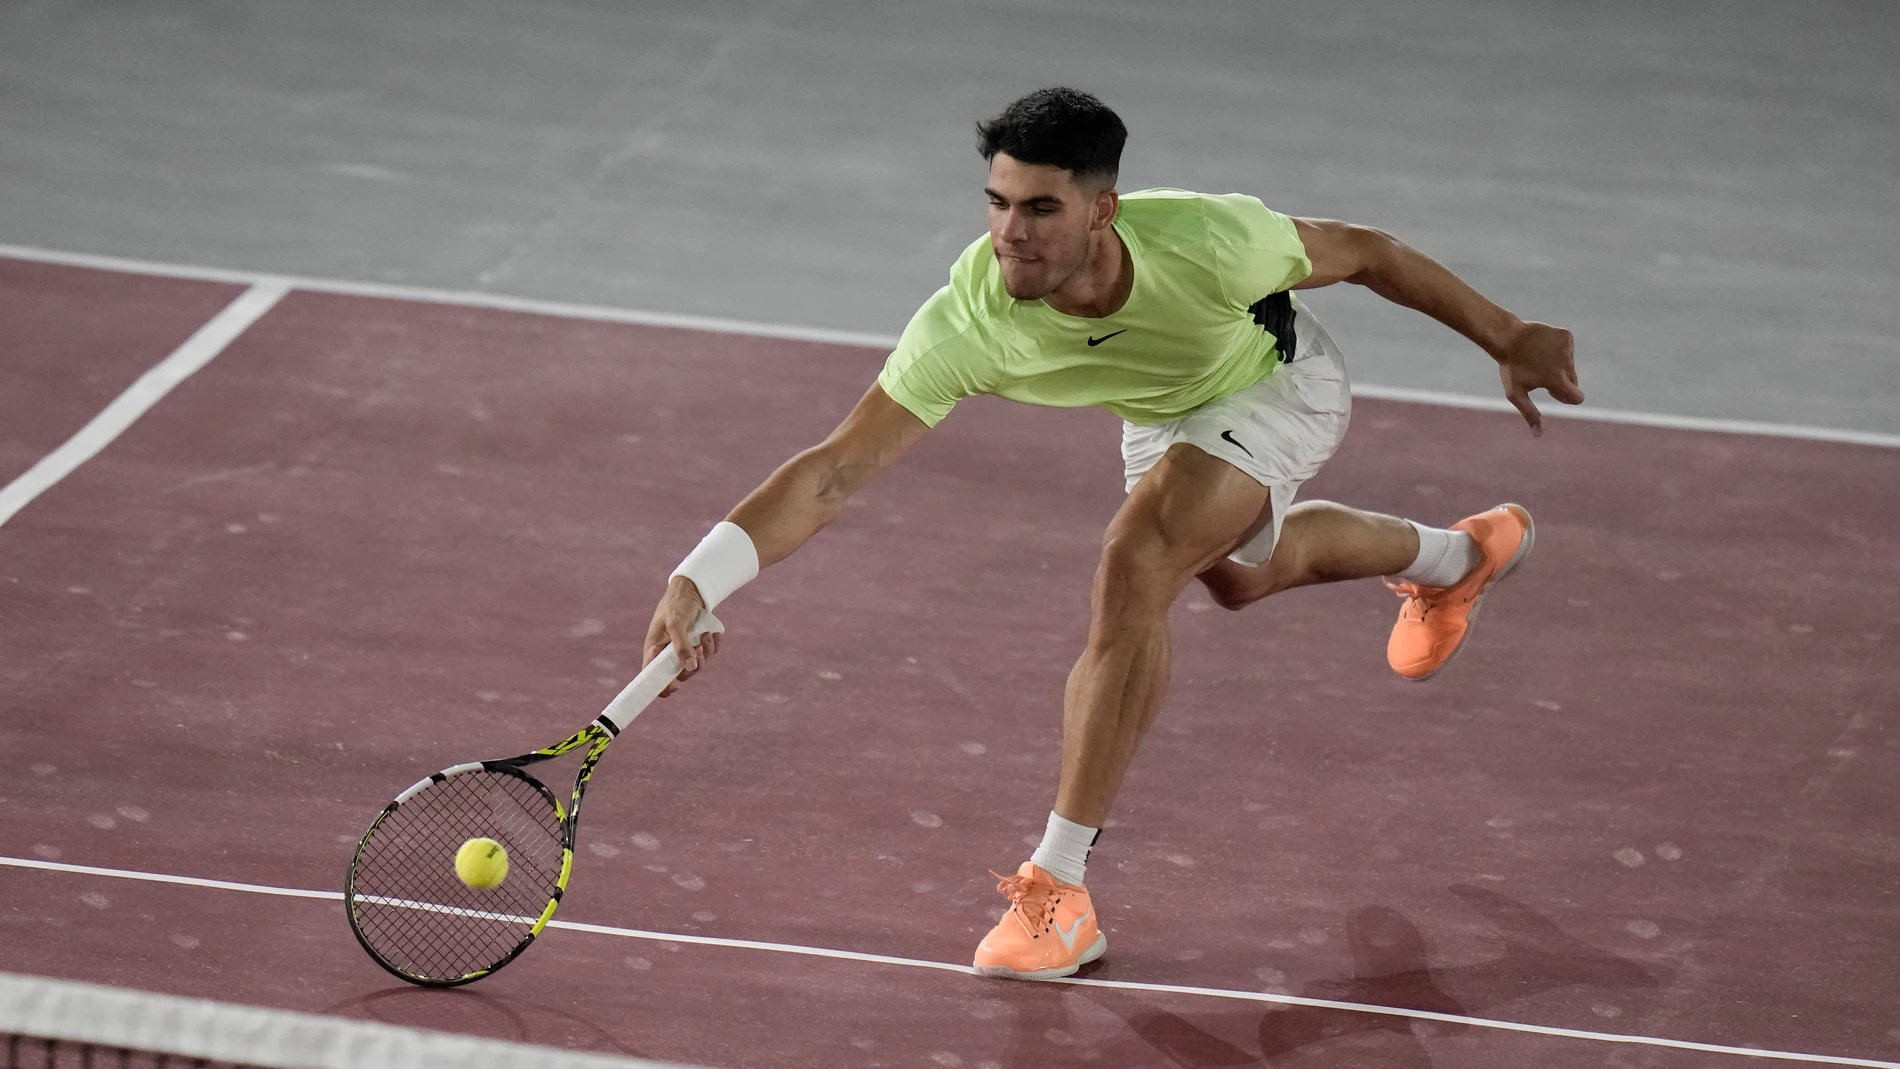 Spain's Carlos Alcaraz returns the ball during an exhibition tennis match against Tommy Paul of the United States at the Plaza de Toros bullring in Mexico City, Wednesday, Nov. 29, 2023. (AP Photo/Eduardo Verdugo)